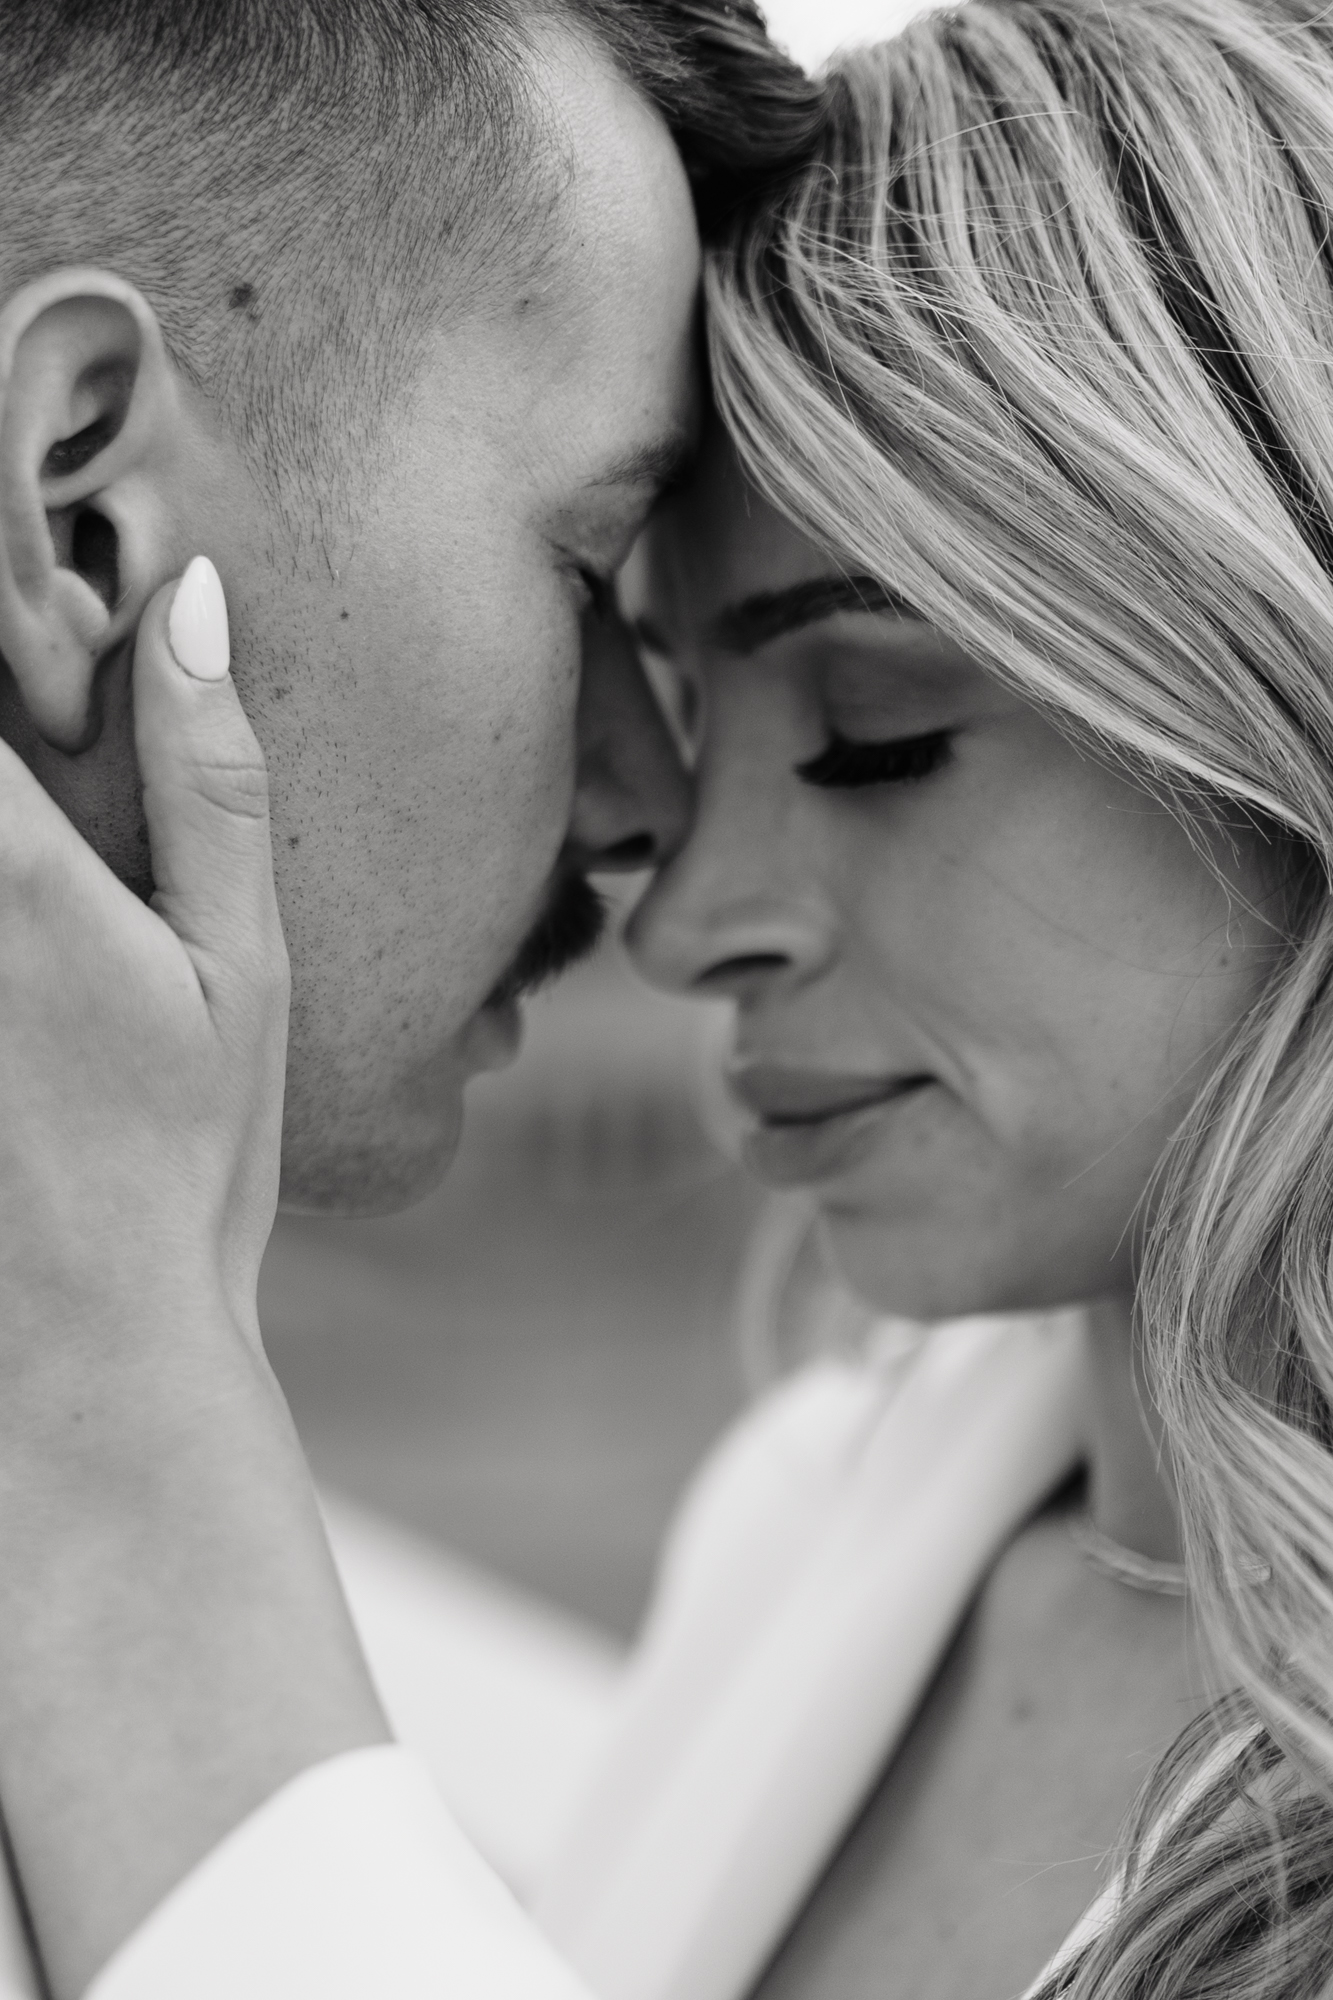 Sweet intimate moment between couple in black and white